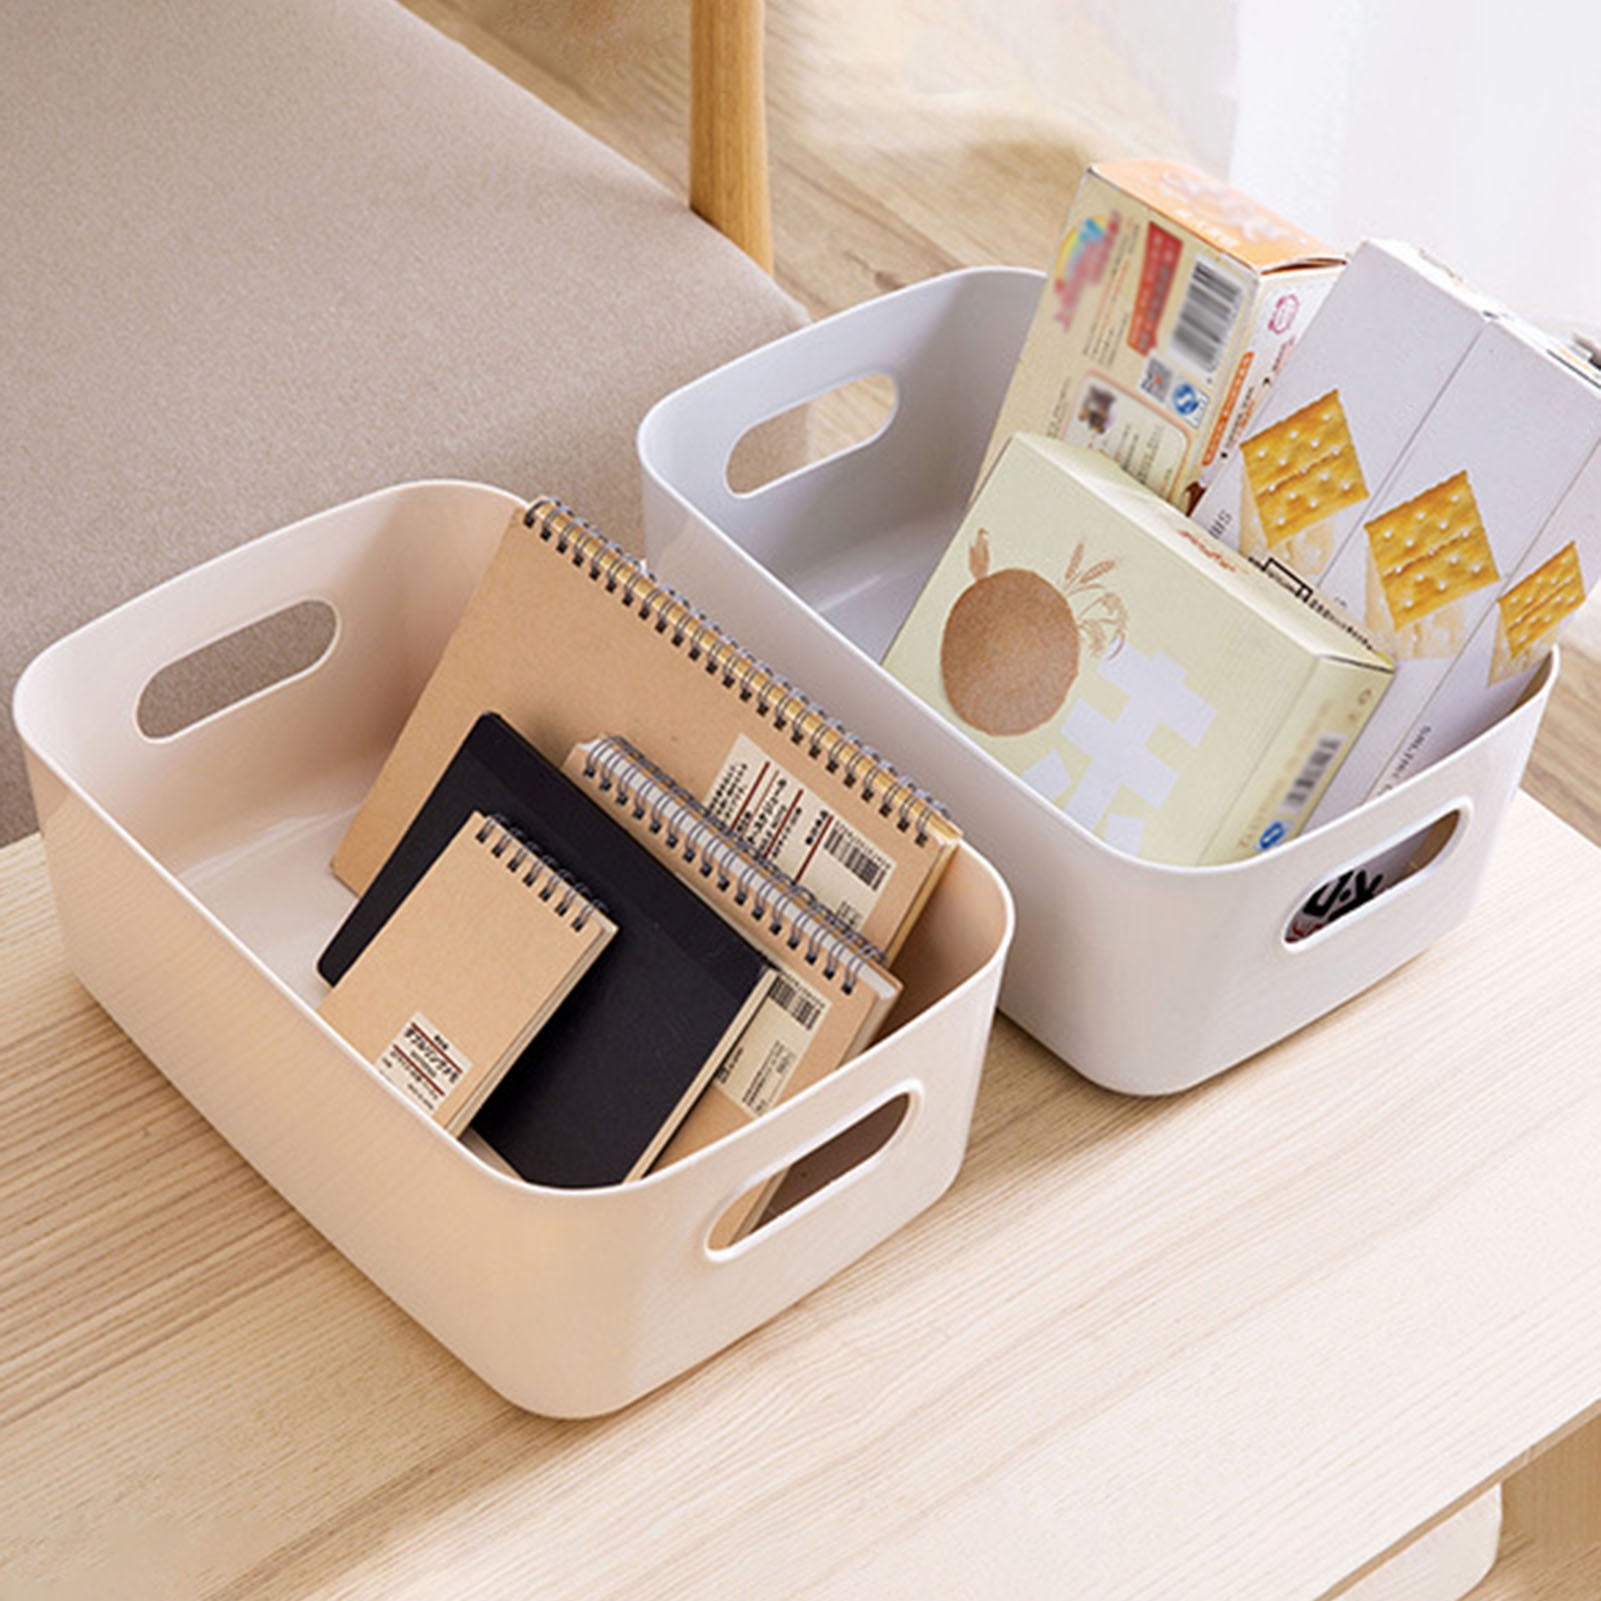 Cheers.US Plastic Storage Baskets - Small Pantry Organizer Basket Bins -  Household Organizers with Cutout Handles for Kitchen Organization,  Countertops, Cabinets, Bedrooms, and Bathrooms 